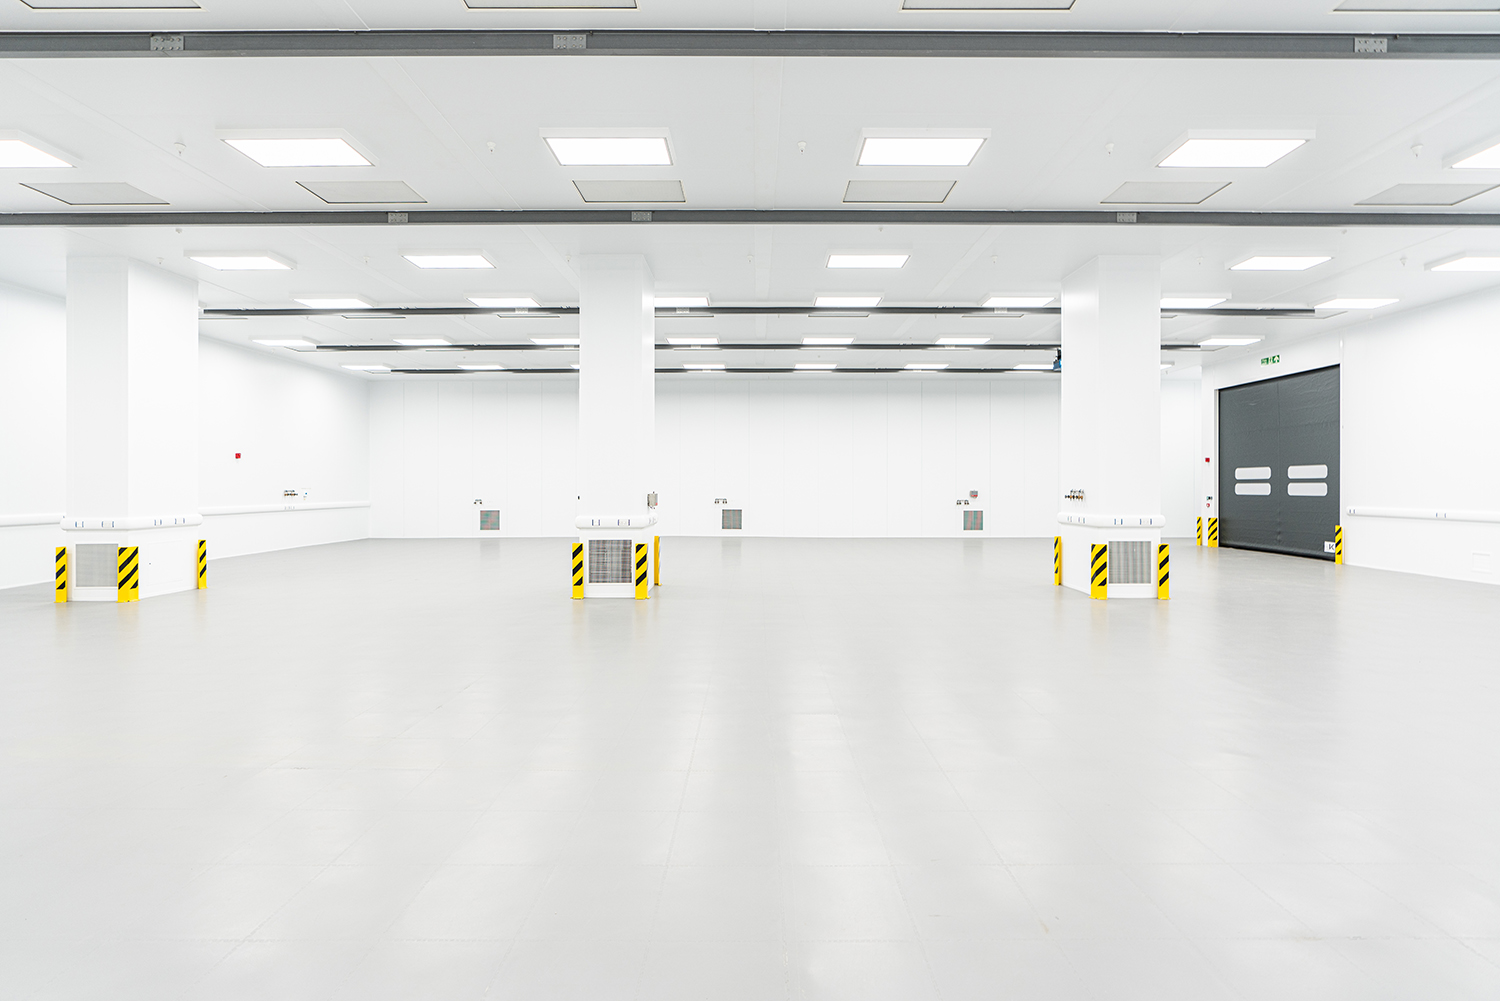 Expand your horizons: think big with a Cleanroom Solutions turnkey project